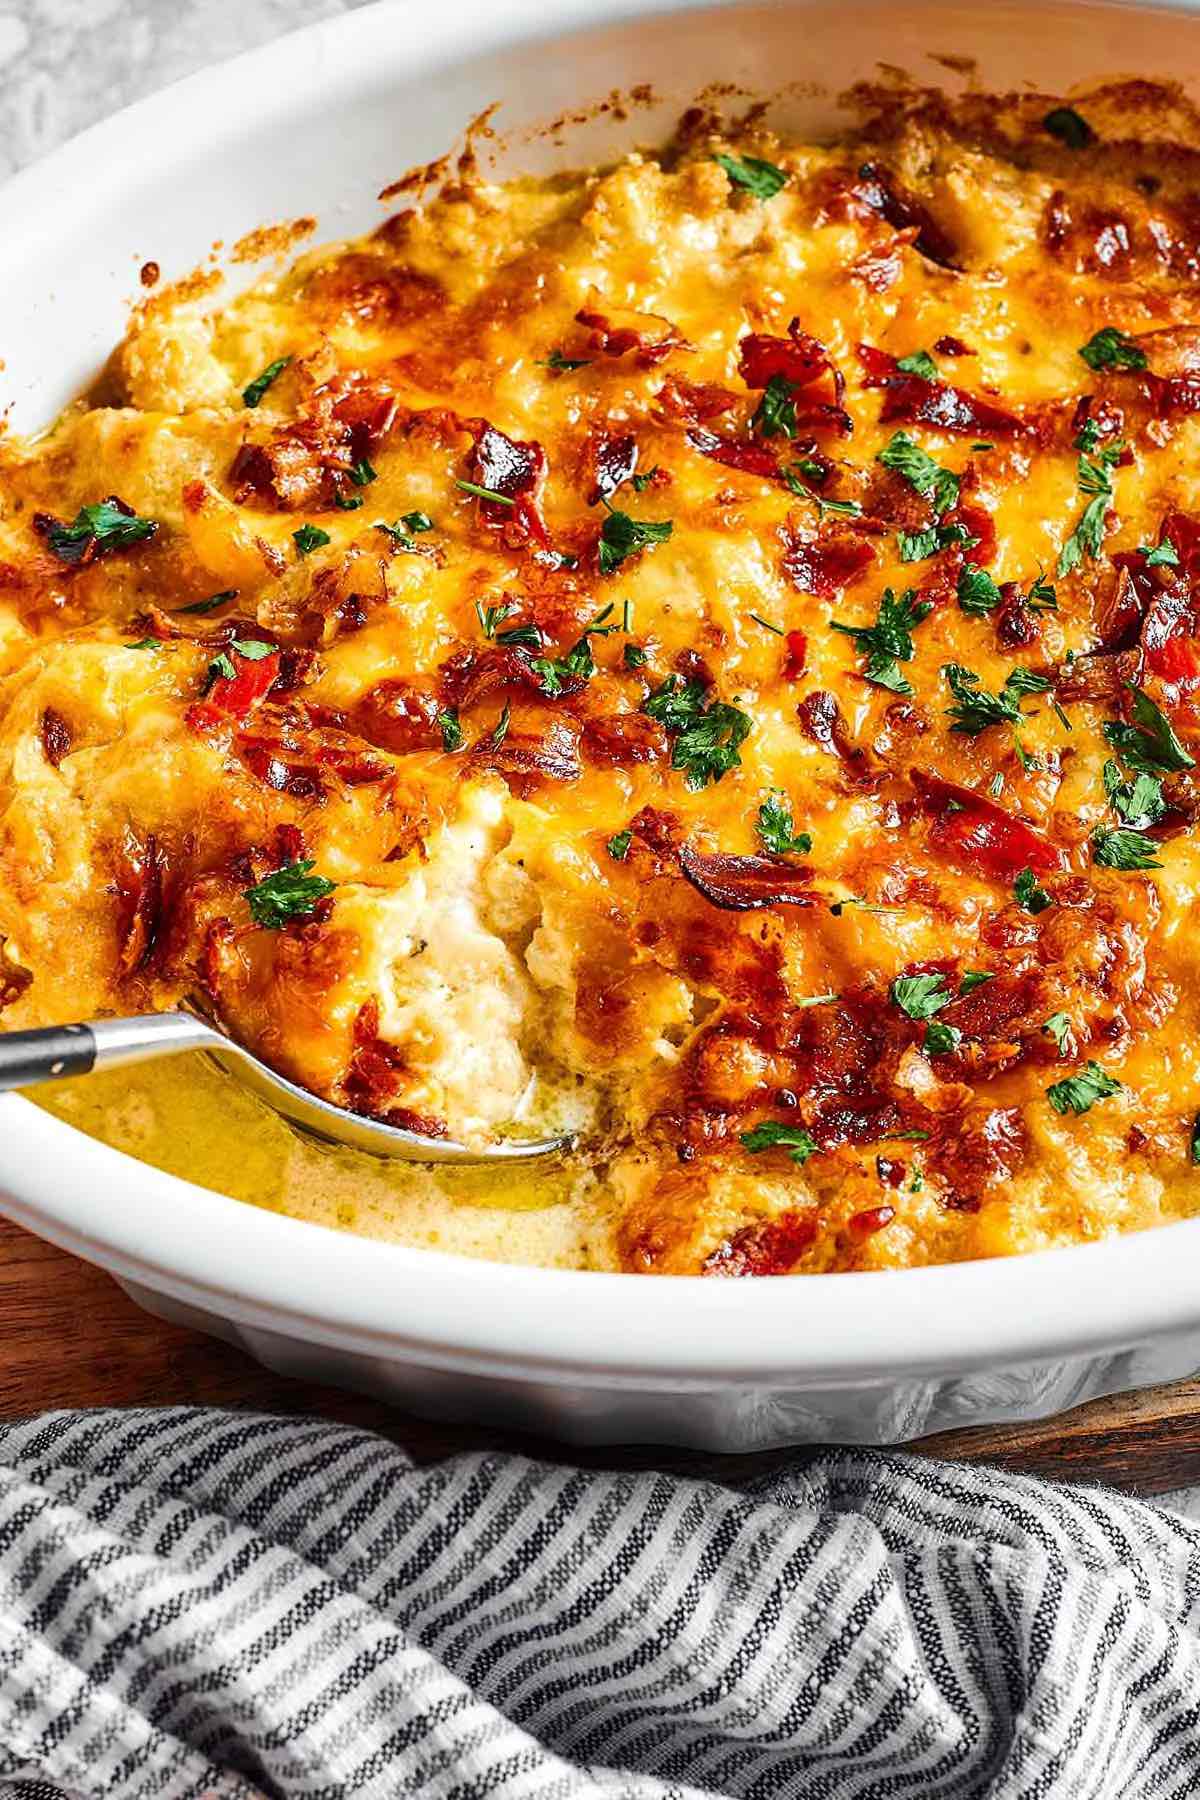 cauliflower casserole with bacon, herbs, and melted cheese on top.